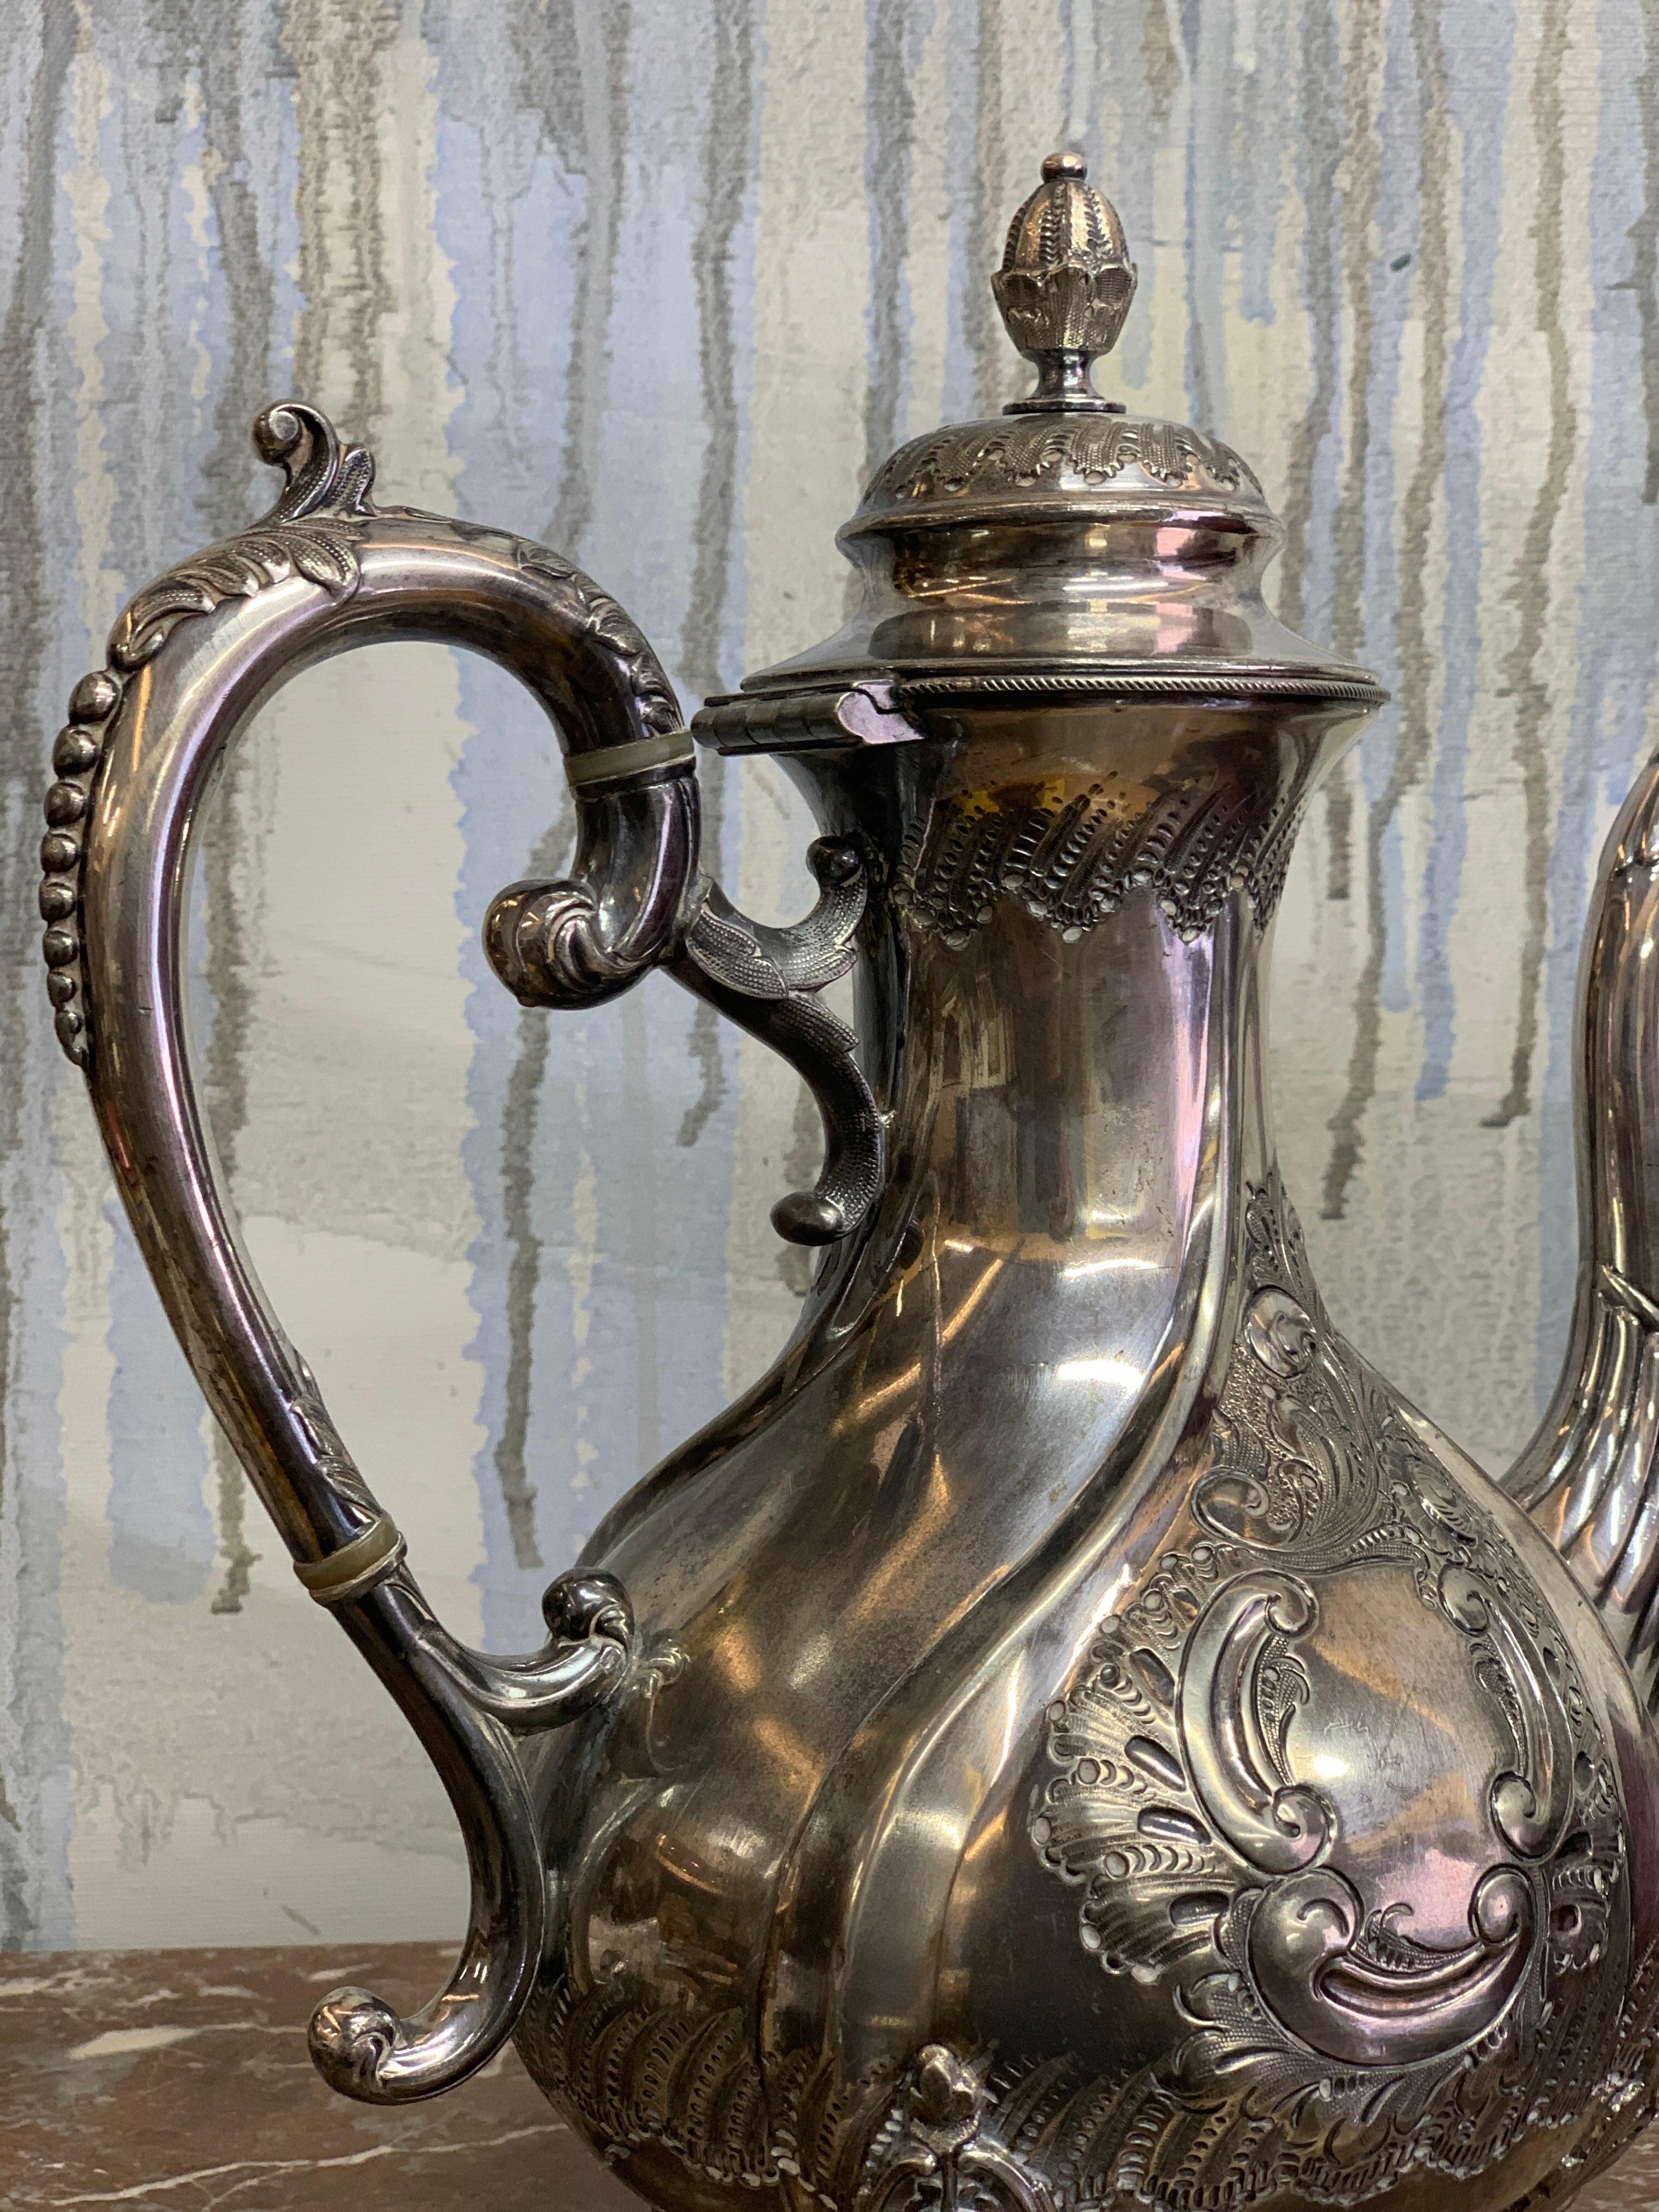 silver plated coffee pot